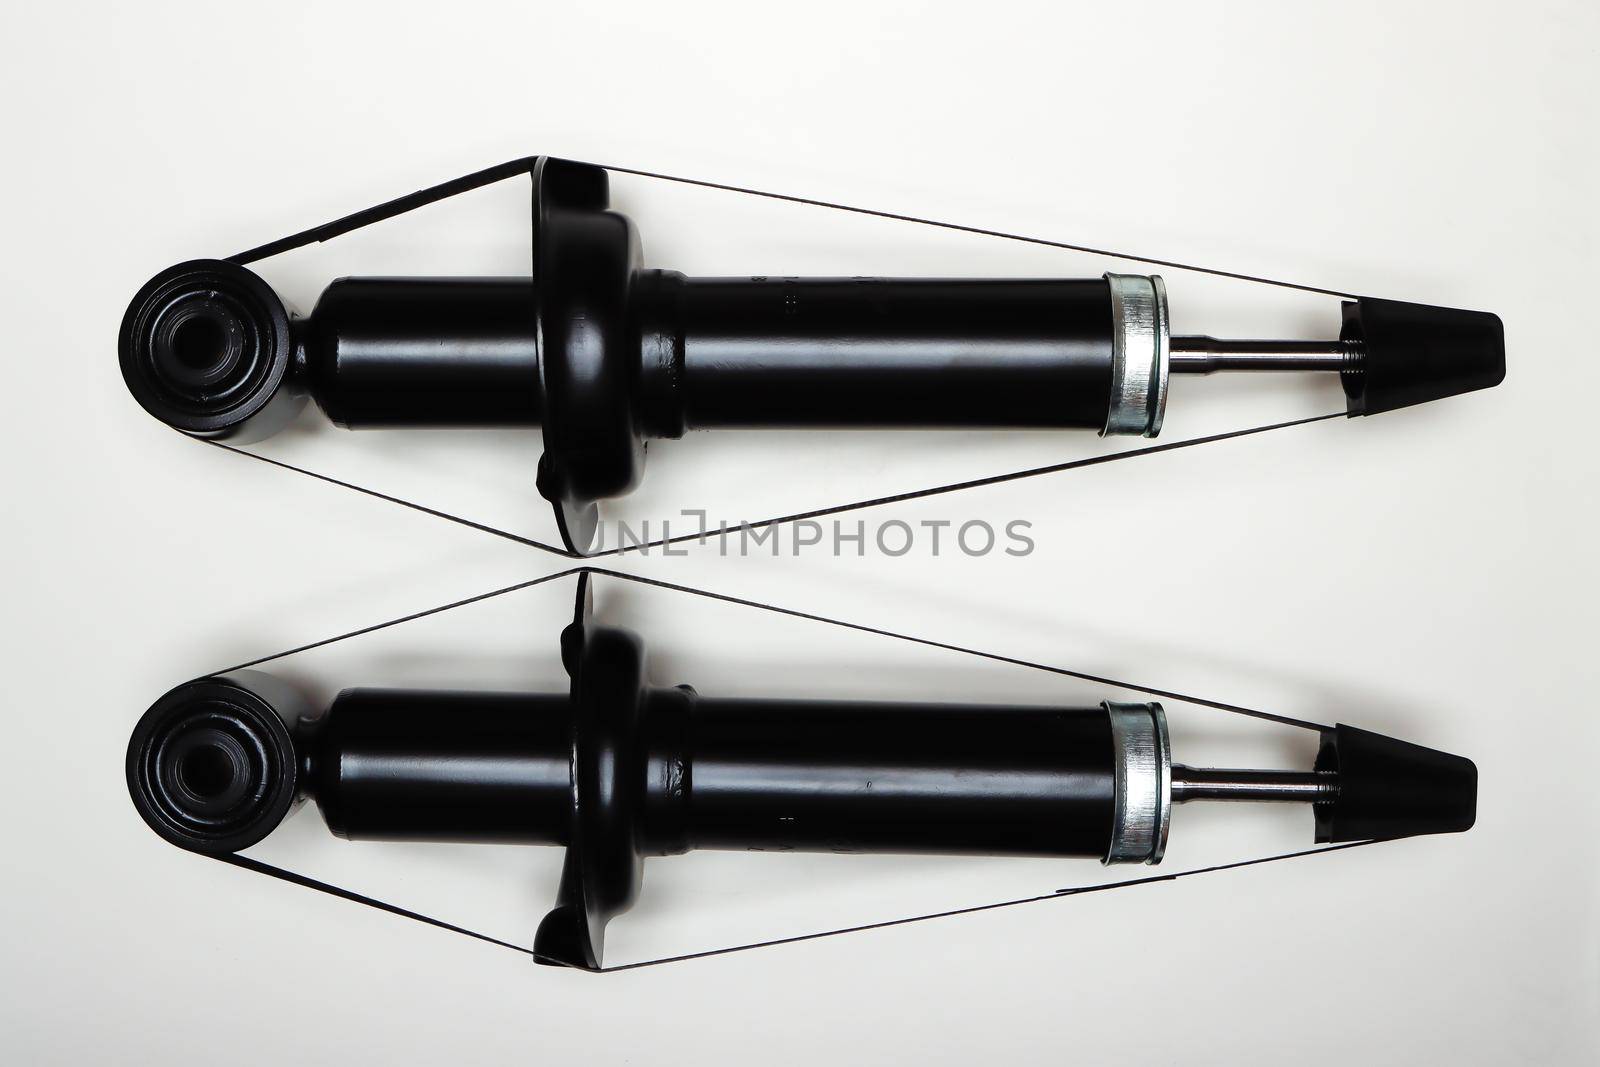 Two new shock absorbers for the car on a flat surface. A set of spare parts for the repair of the chassis of the vehicle. Details on white background, copy space available. UHD 4K.